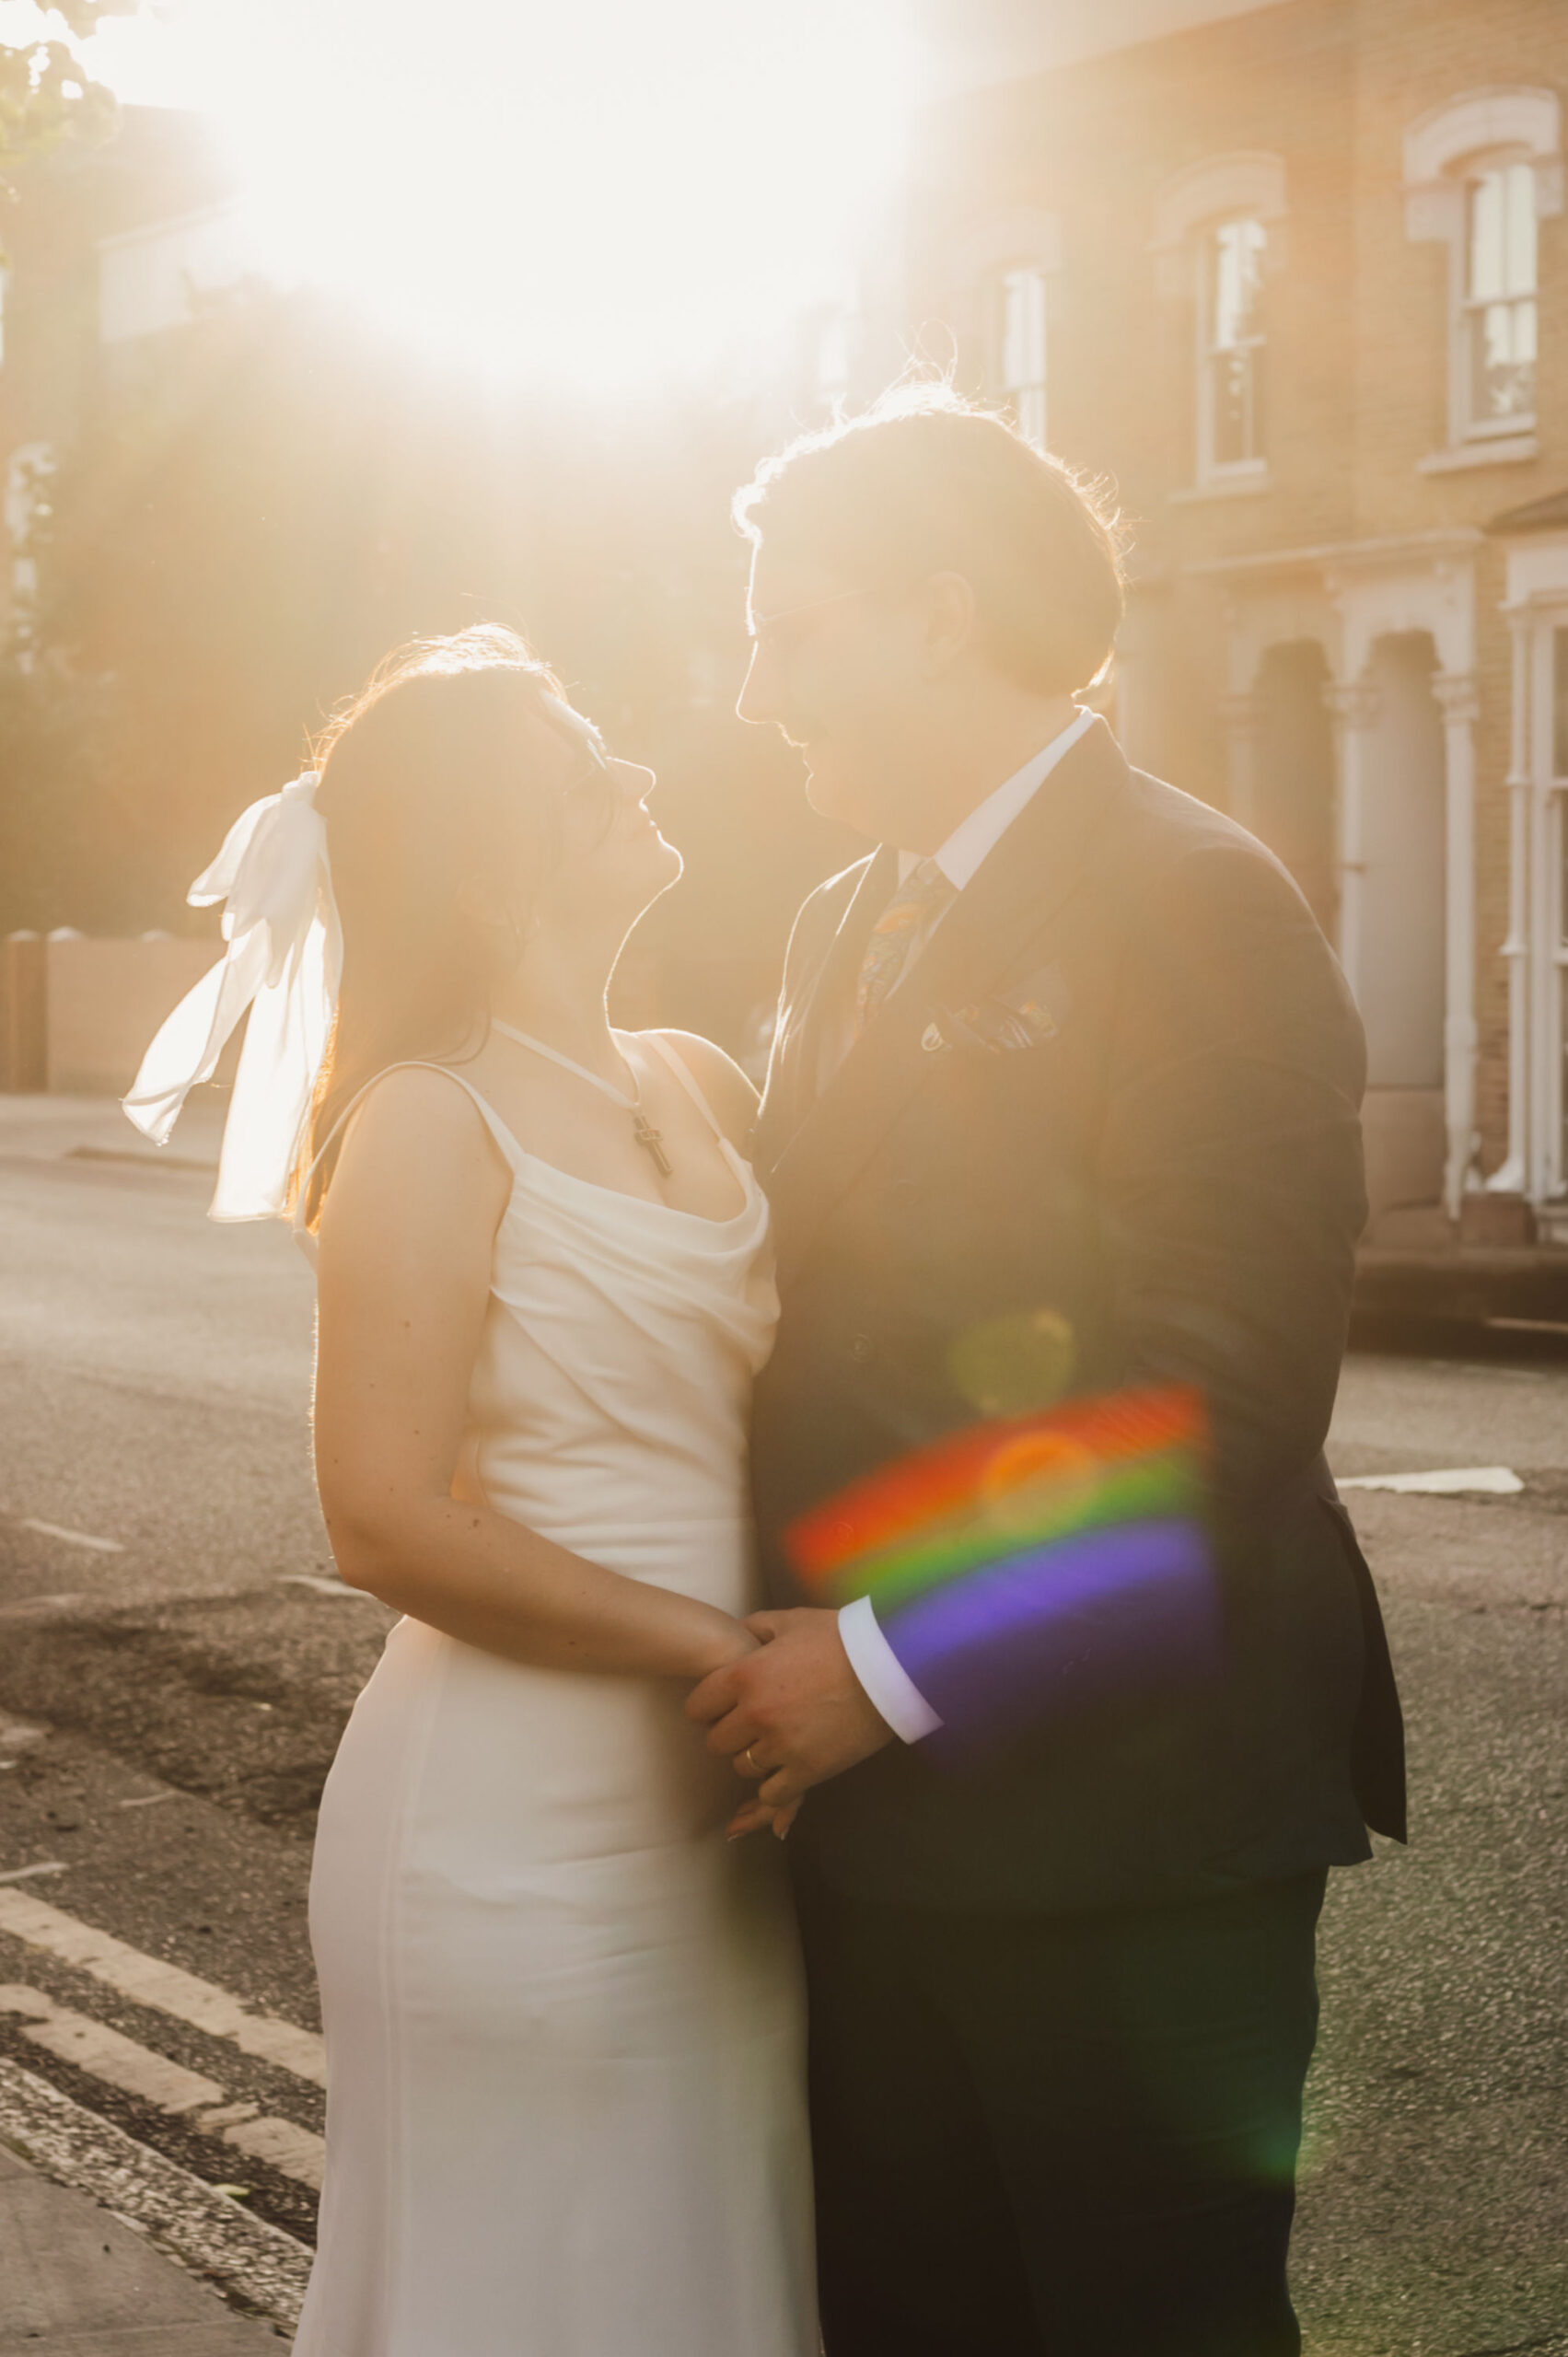 Newly married couple at Clapton Country Club in East London in the golden hour with a rainbow lens flare